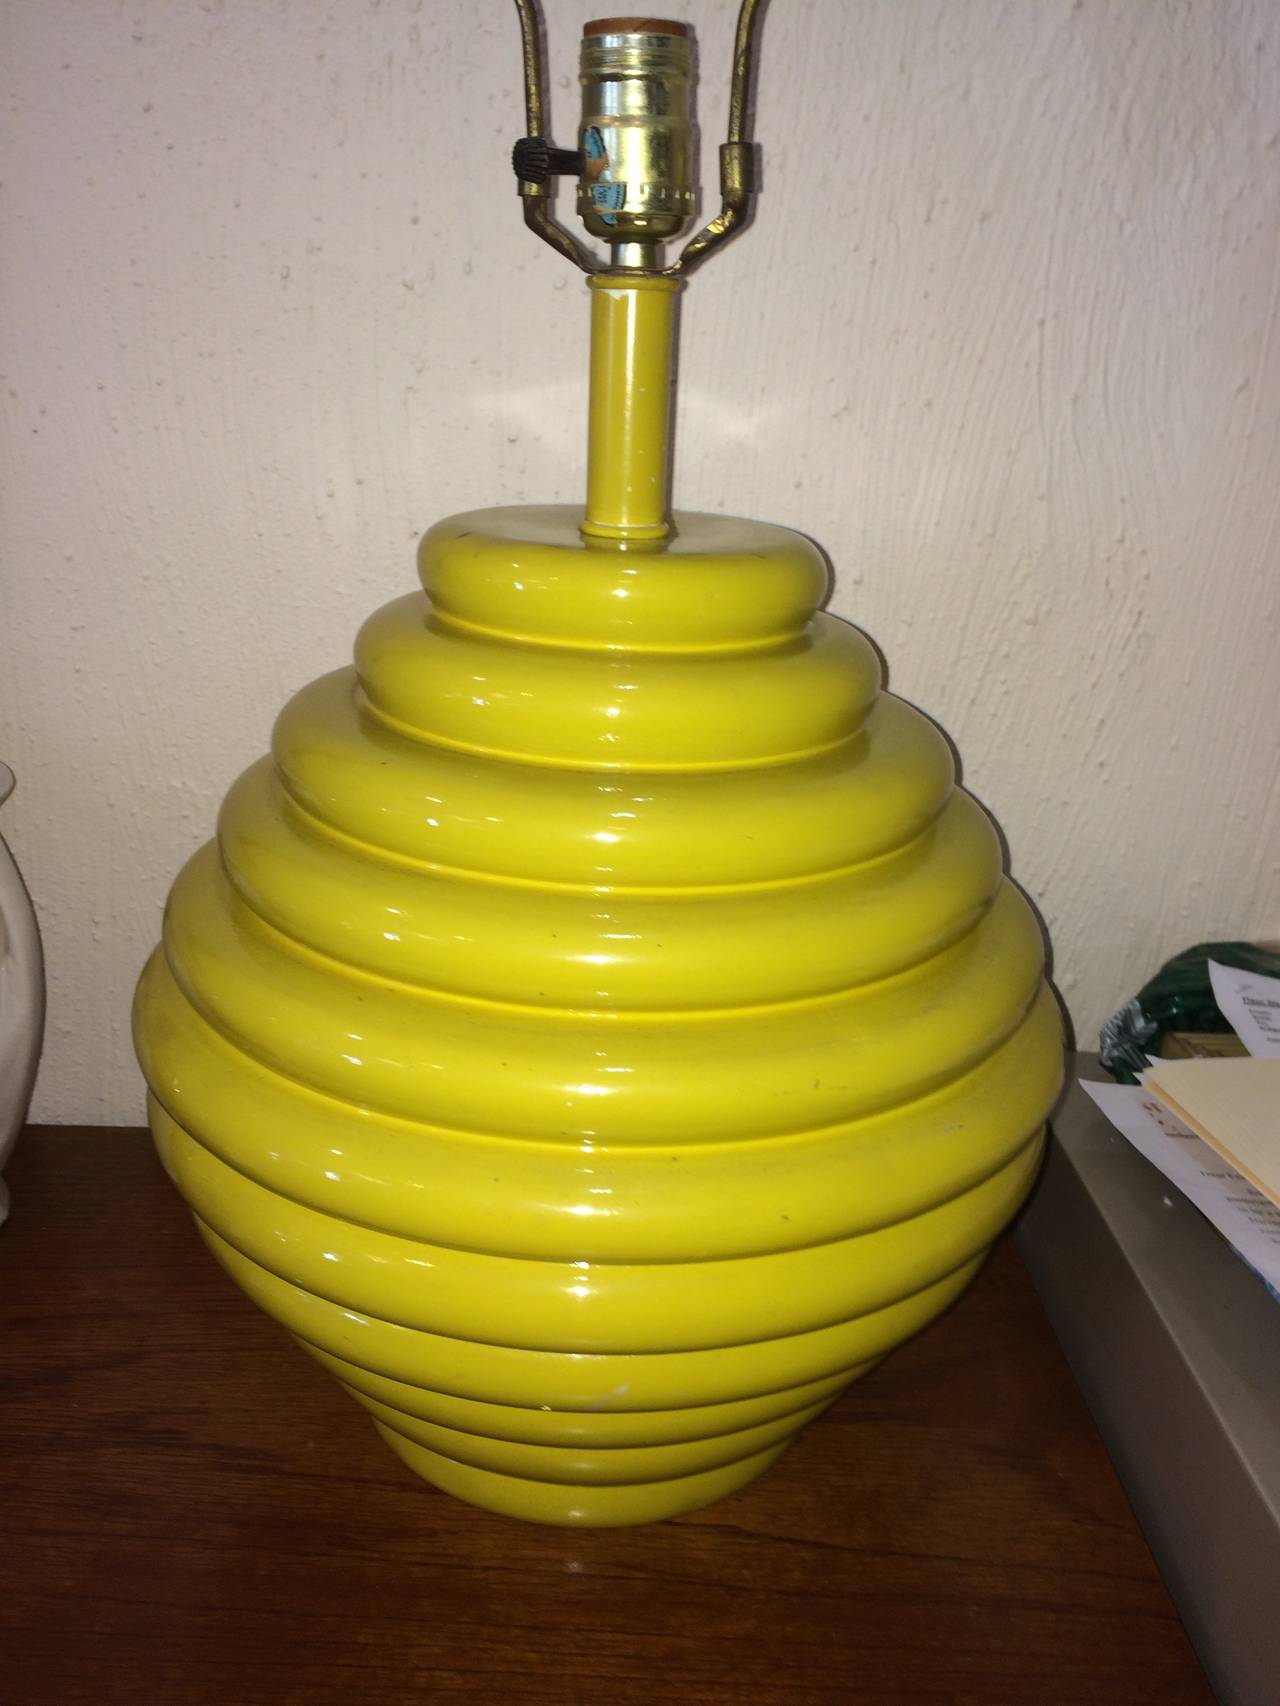 Pair of beehive shaped ceramic lamps. Striking Mid-Century Modern golden yellow pair. Perfect complement to any room.